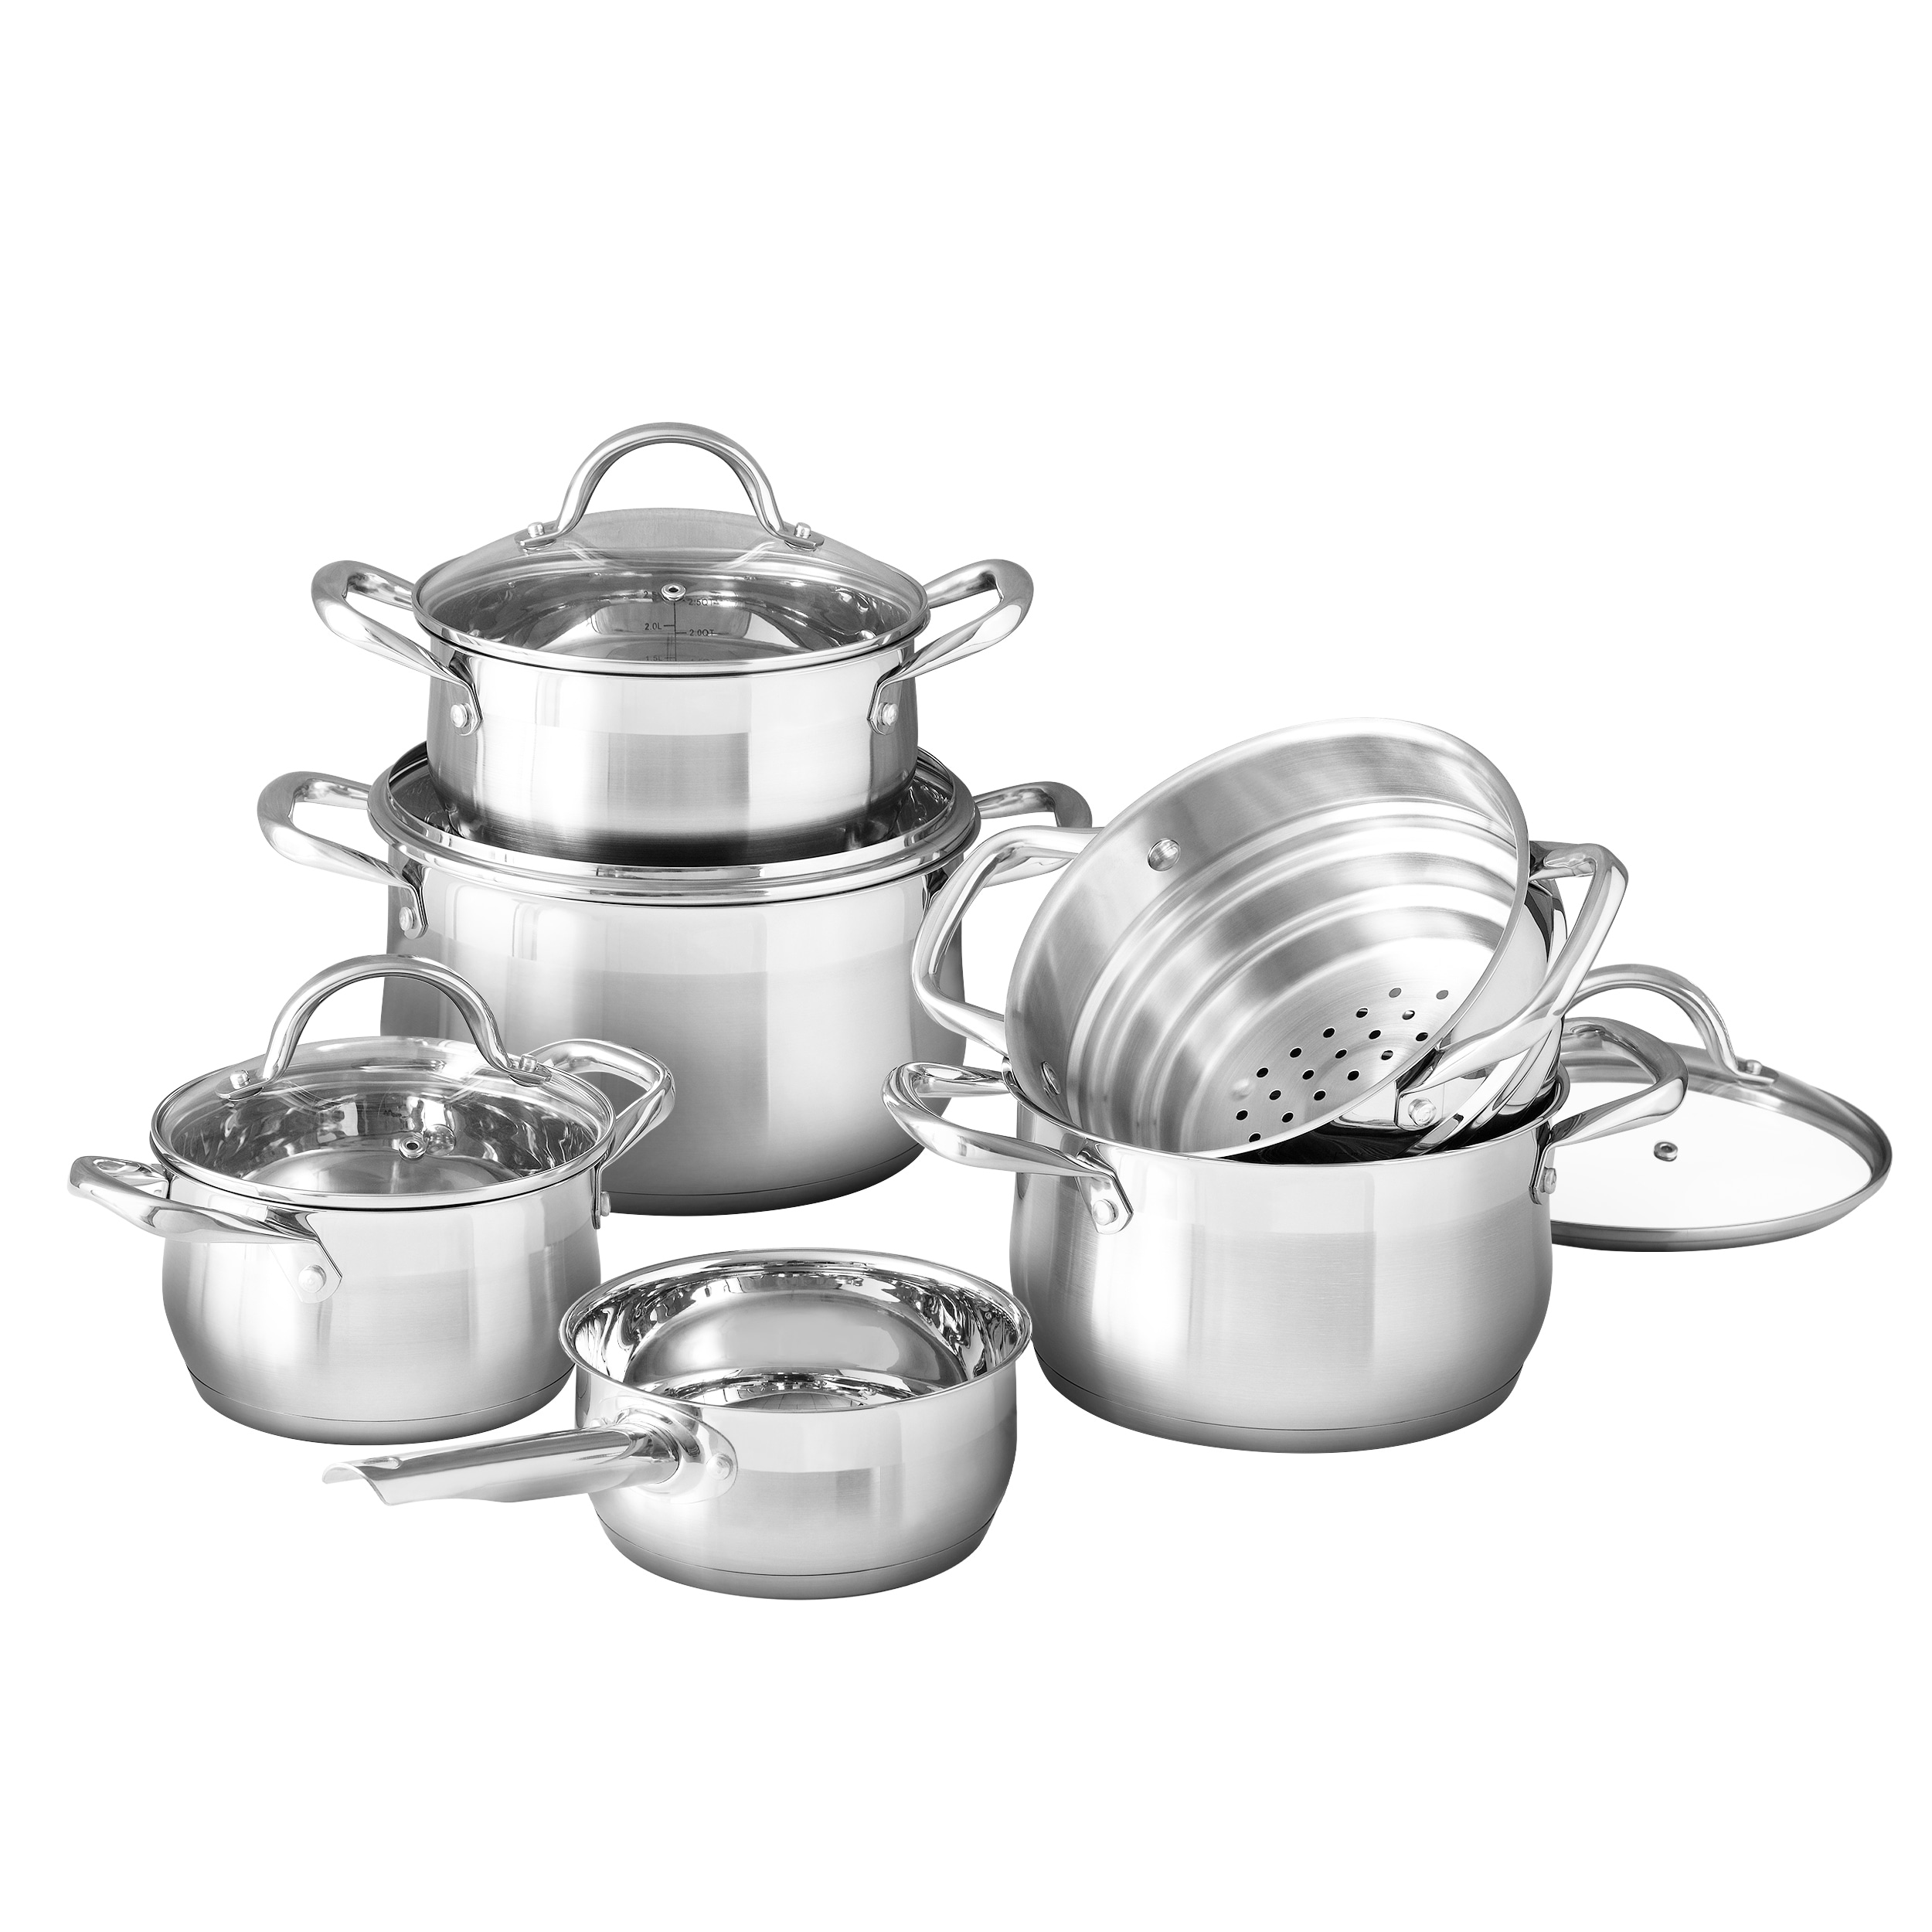 https://ak1.ostkcdn.com/images/products/is/images/direct/548a031ea5b9c5bcd7aed816445053ce6976b58e/Bergner-BGUS10116STS-10-Piece-Stainless-Steel-Dishwasher-Safe-Induction-Ready-Set.jpg